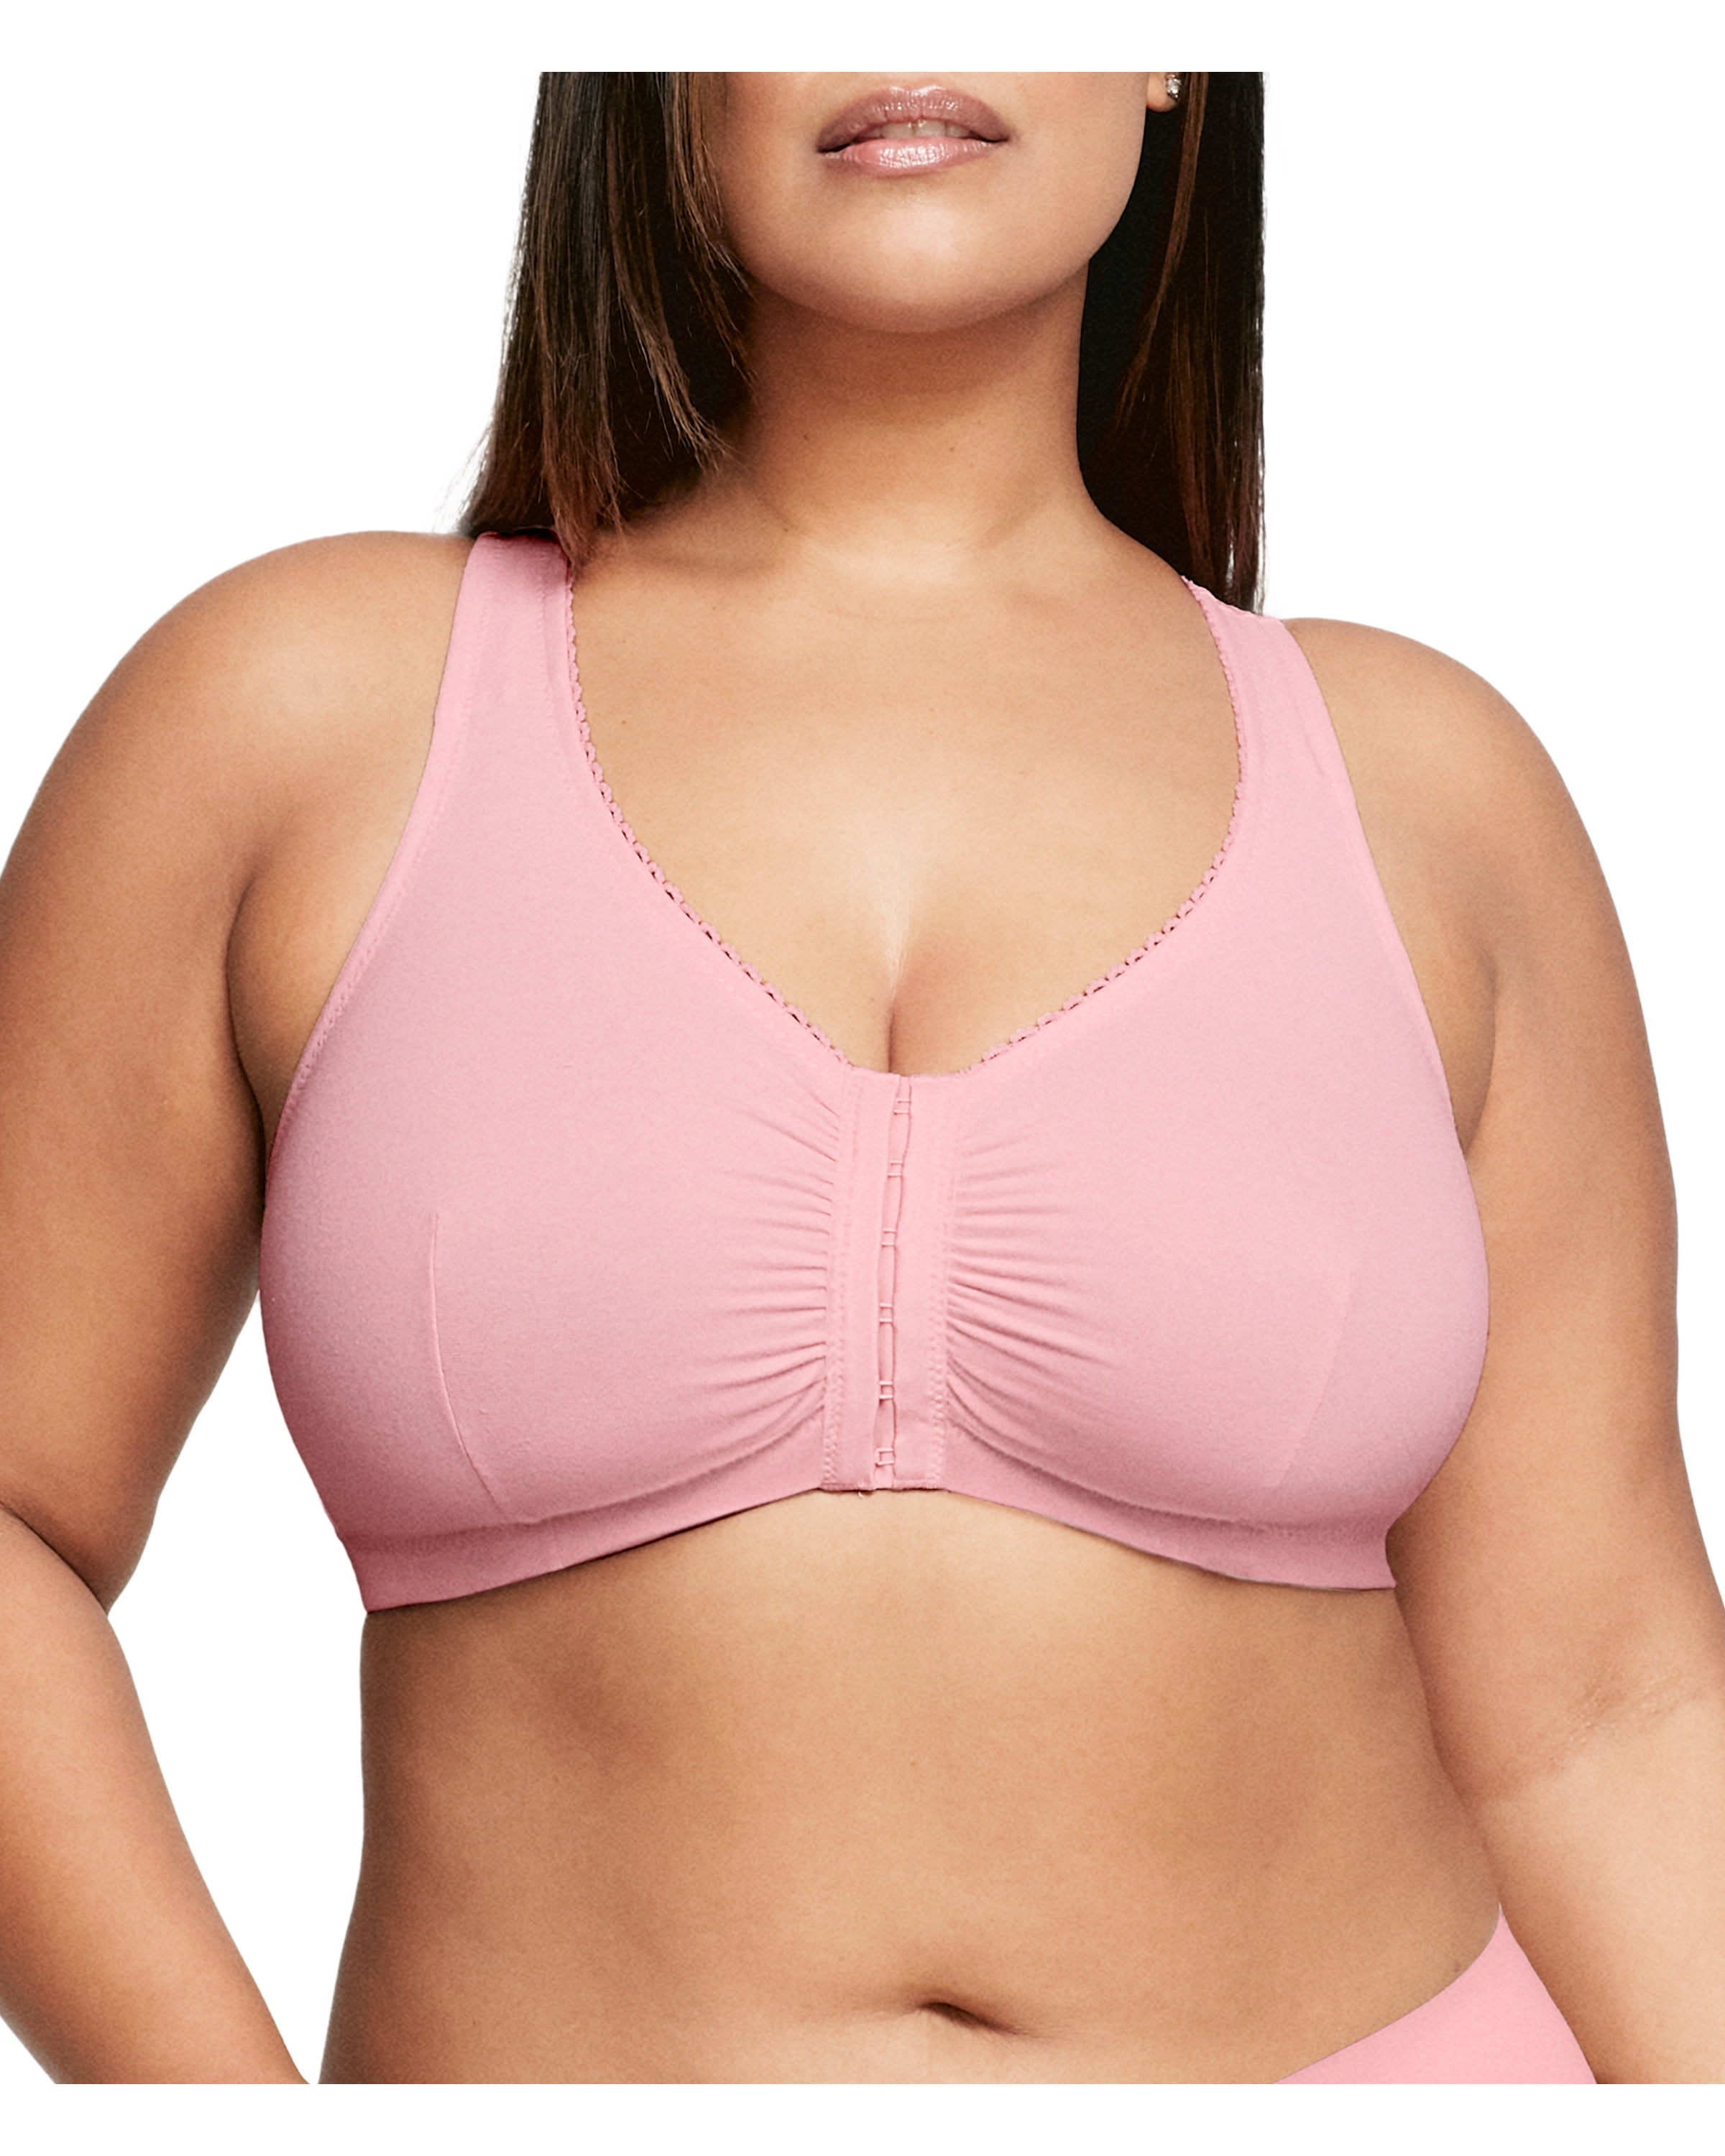 These 4 bras made Glamorise famous - Curvy Bras